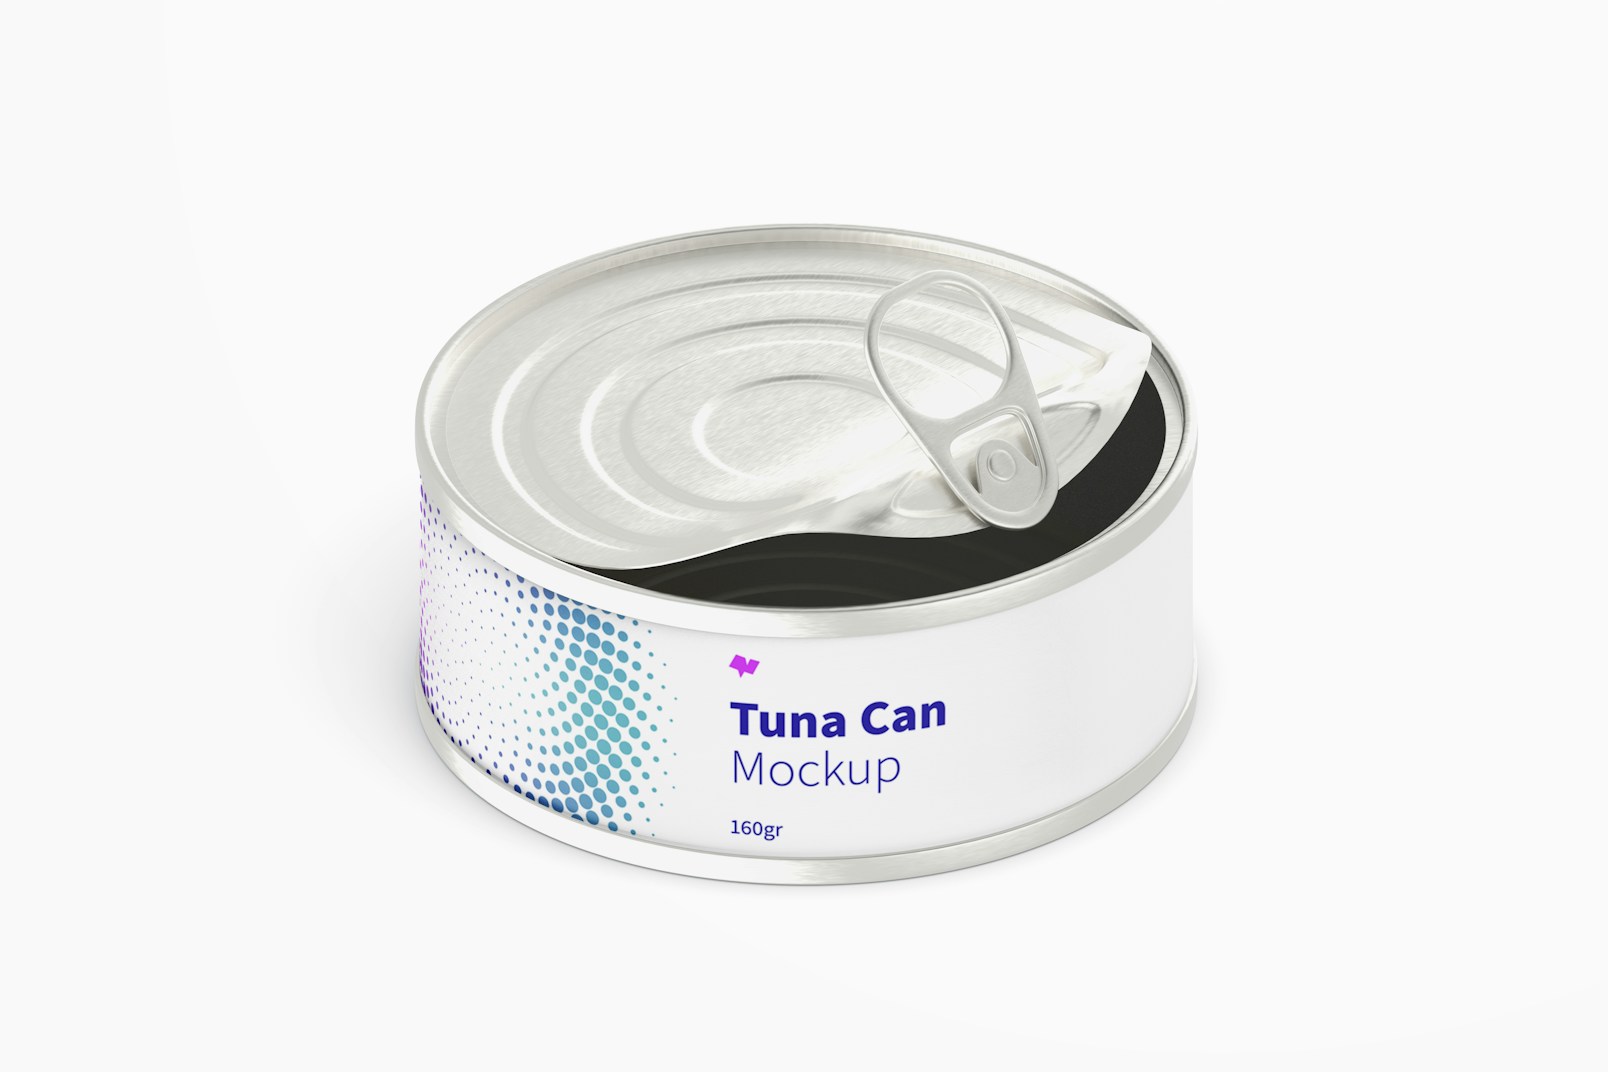 160gr Tuna Can Mockup, Isometric Right View